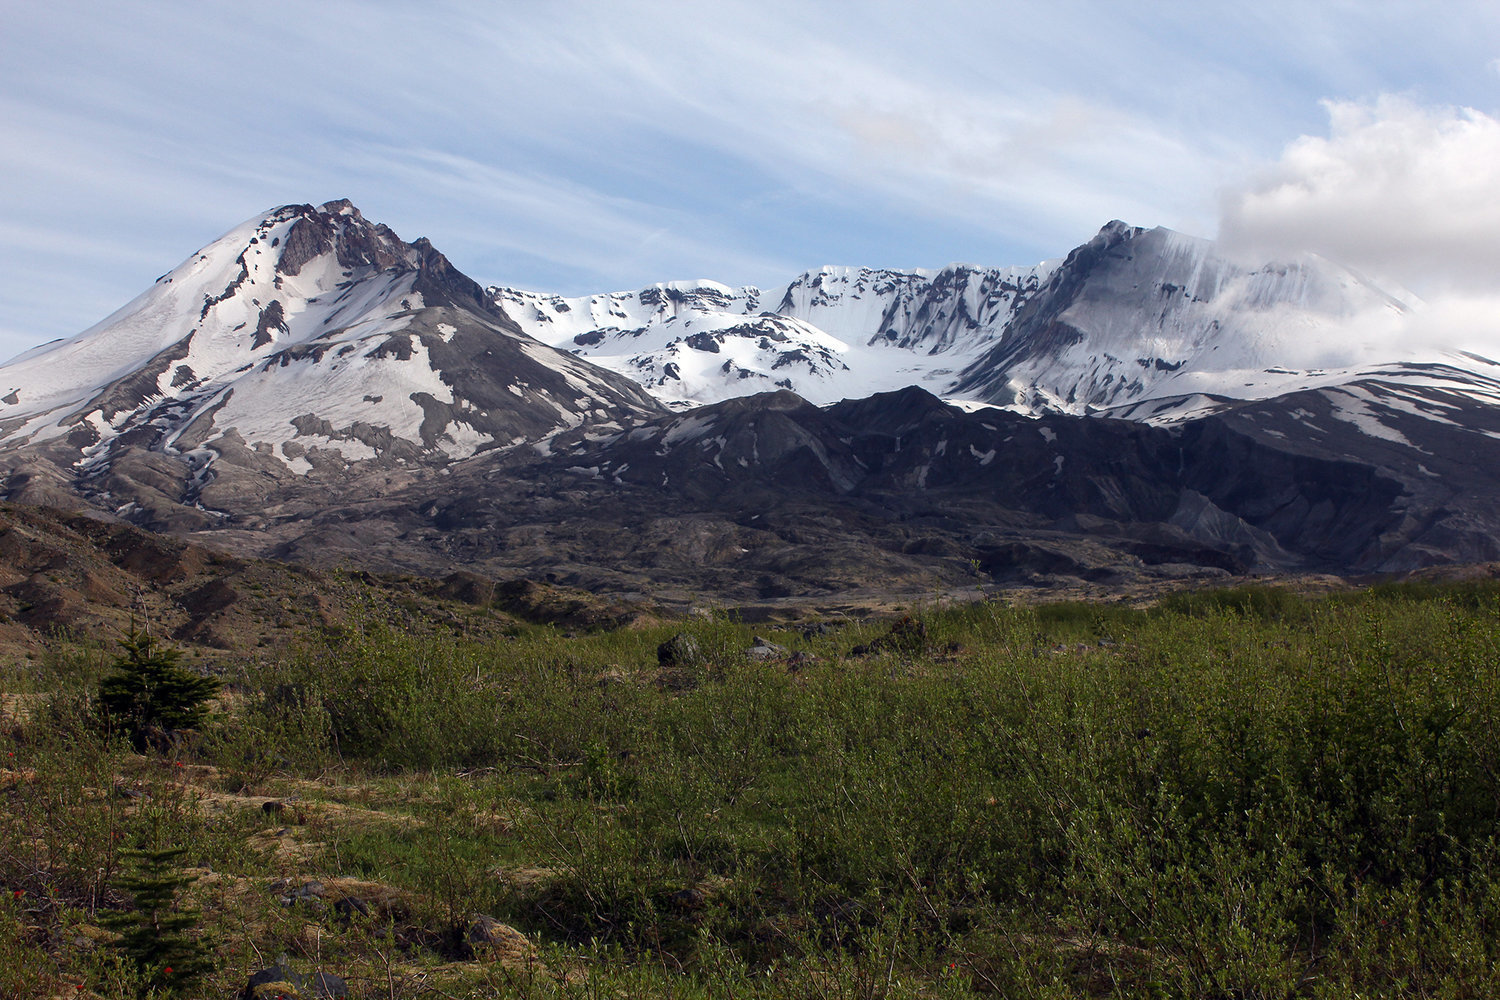 The Truman Trail brings hikers a view of Mount St. Helens that, on a clear day, is hard to beat. The trail brings hikers from the north to the mouth of the crater, directly in line with the direction of the 1980 eruption's blast that caused the largest recorded landslide in history.